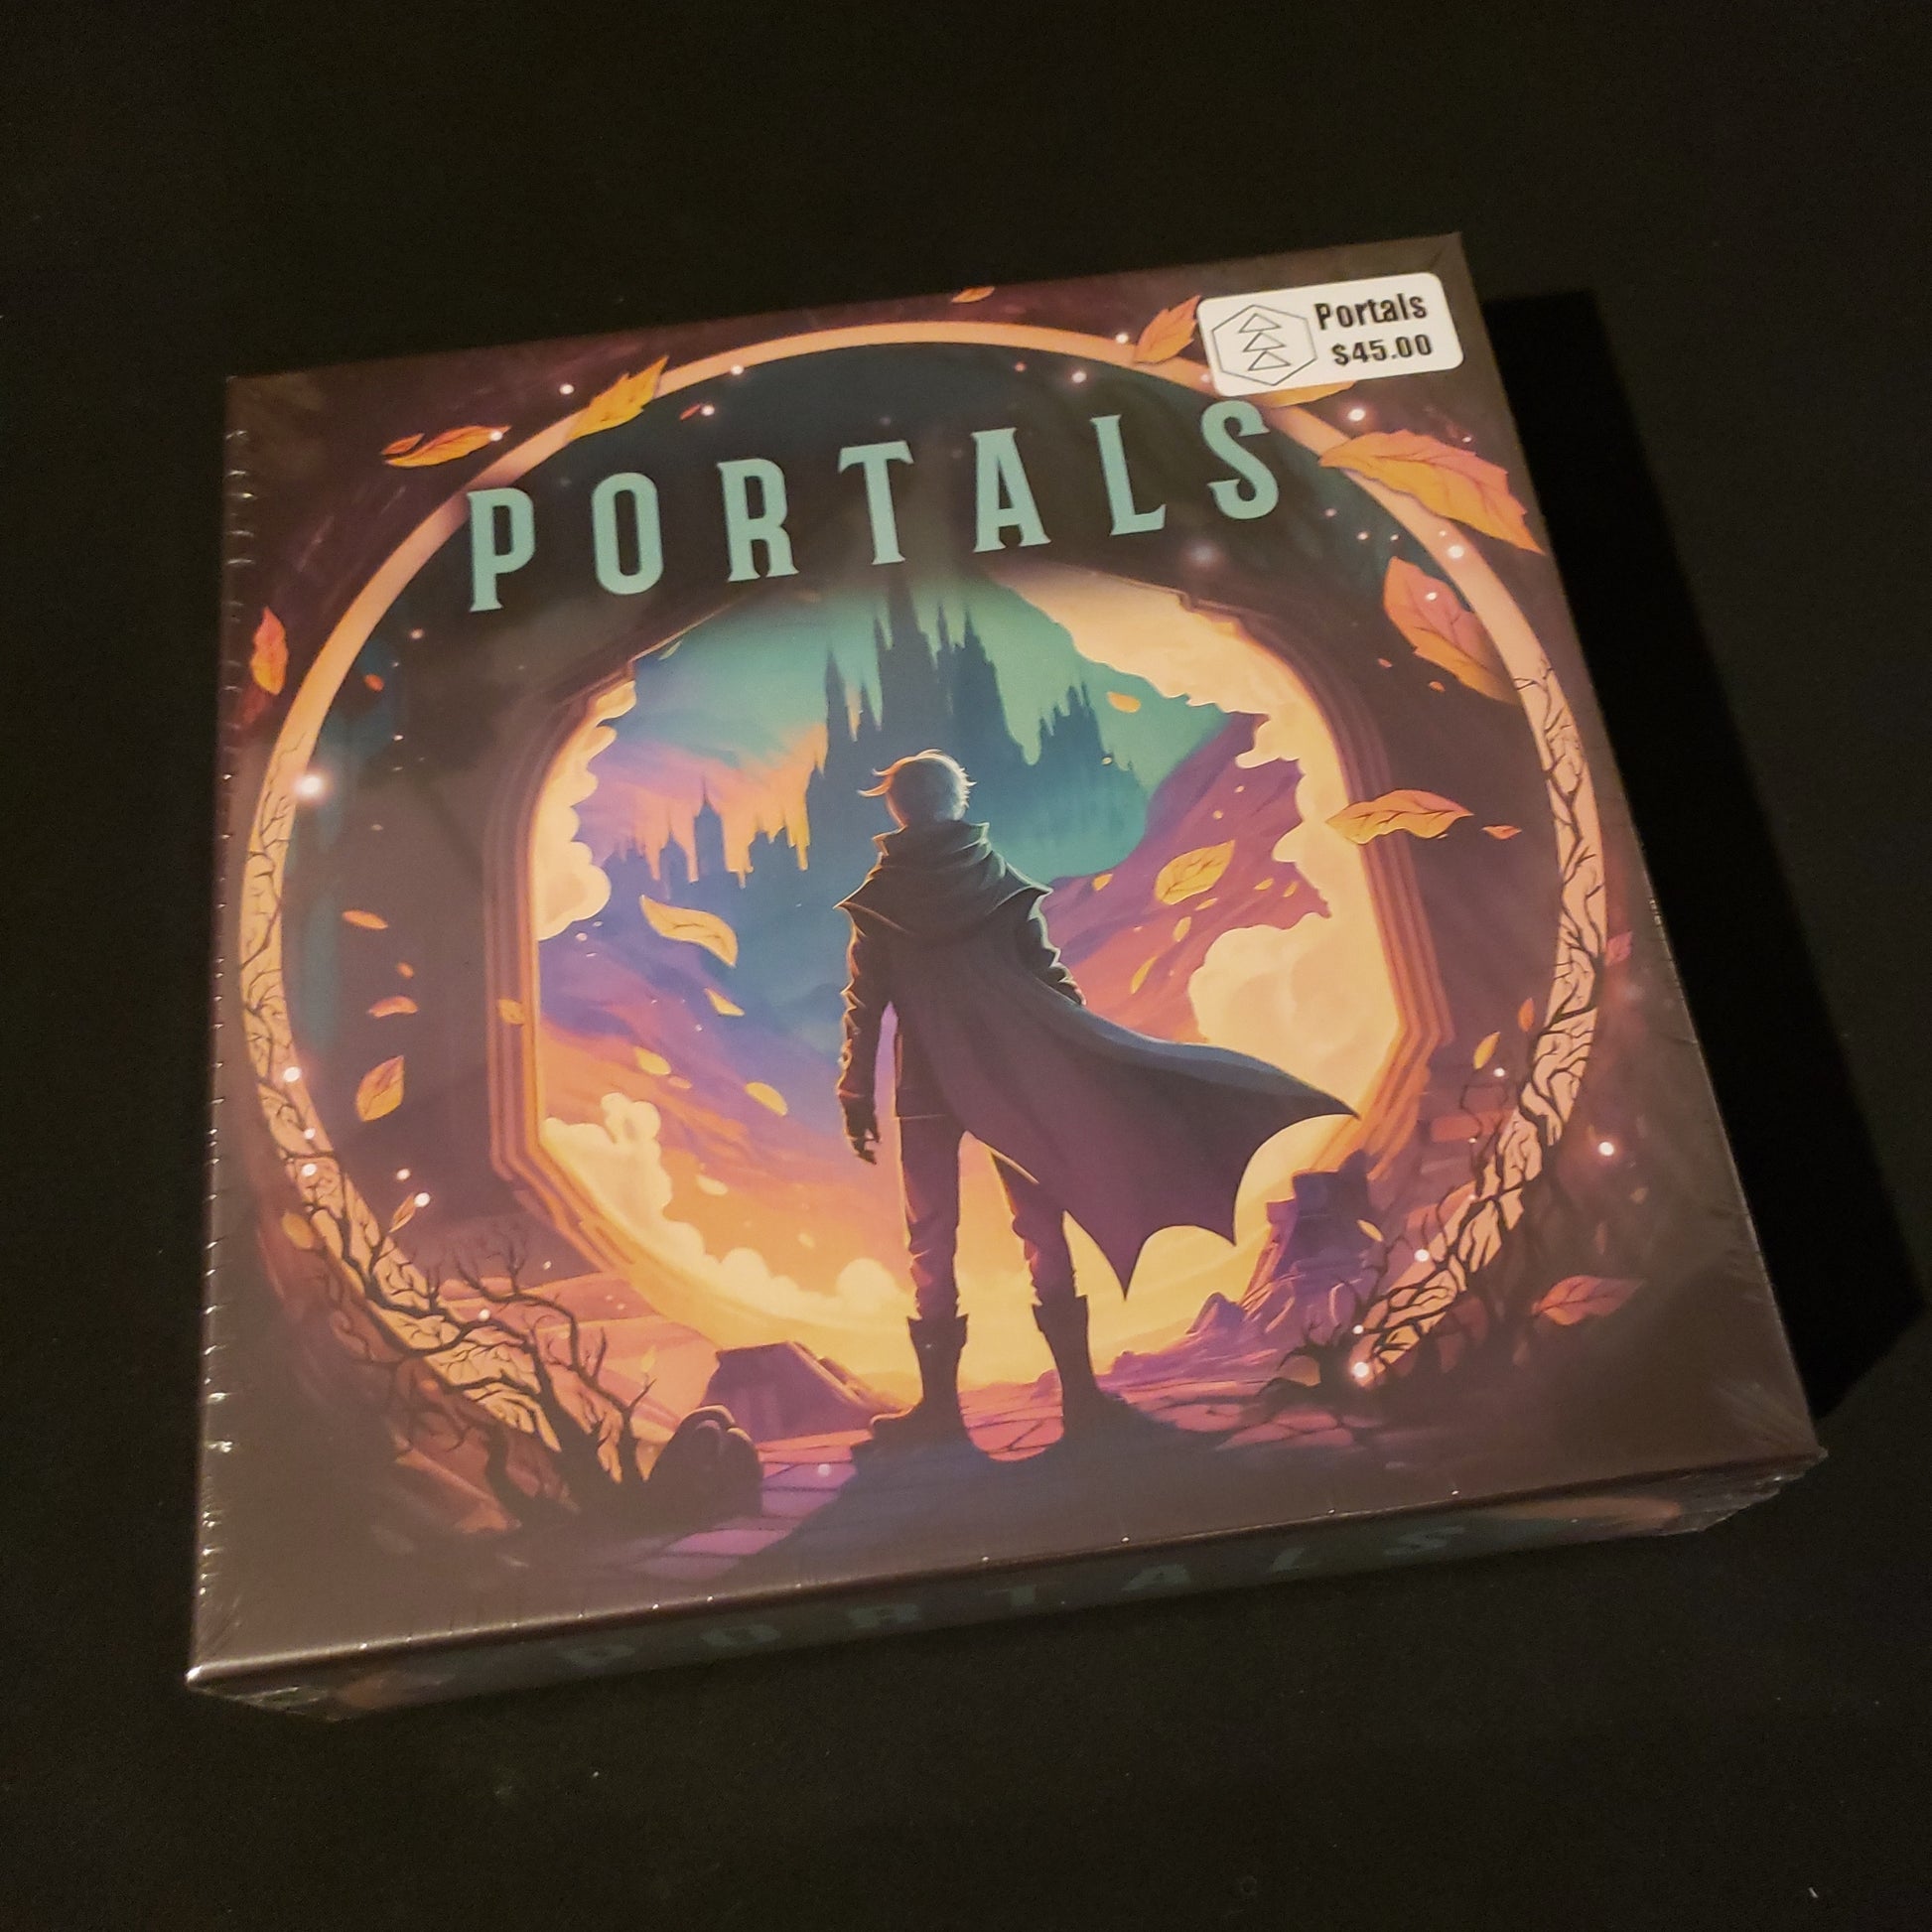 Image shows the front cover of the box of the Portals board game